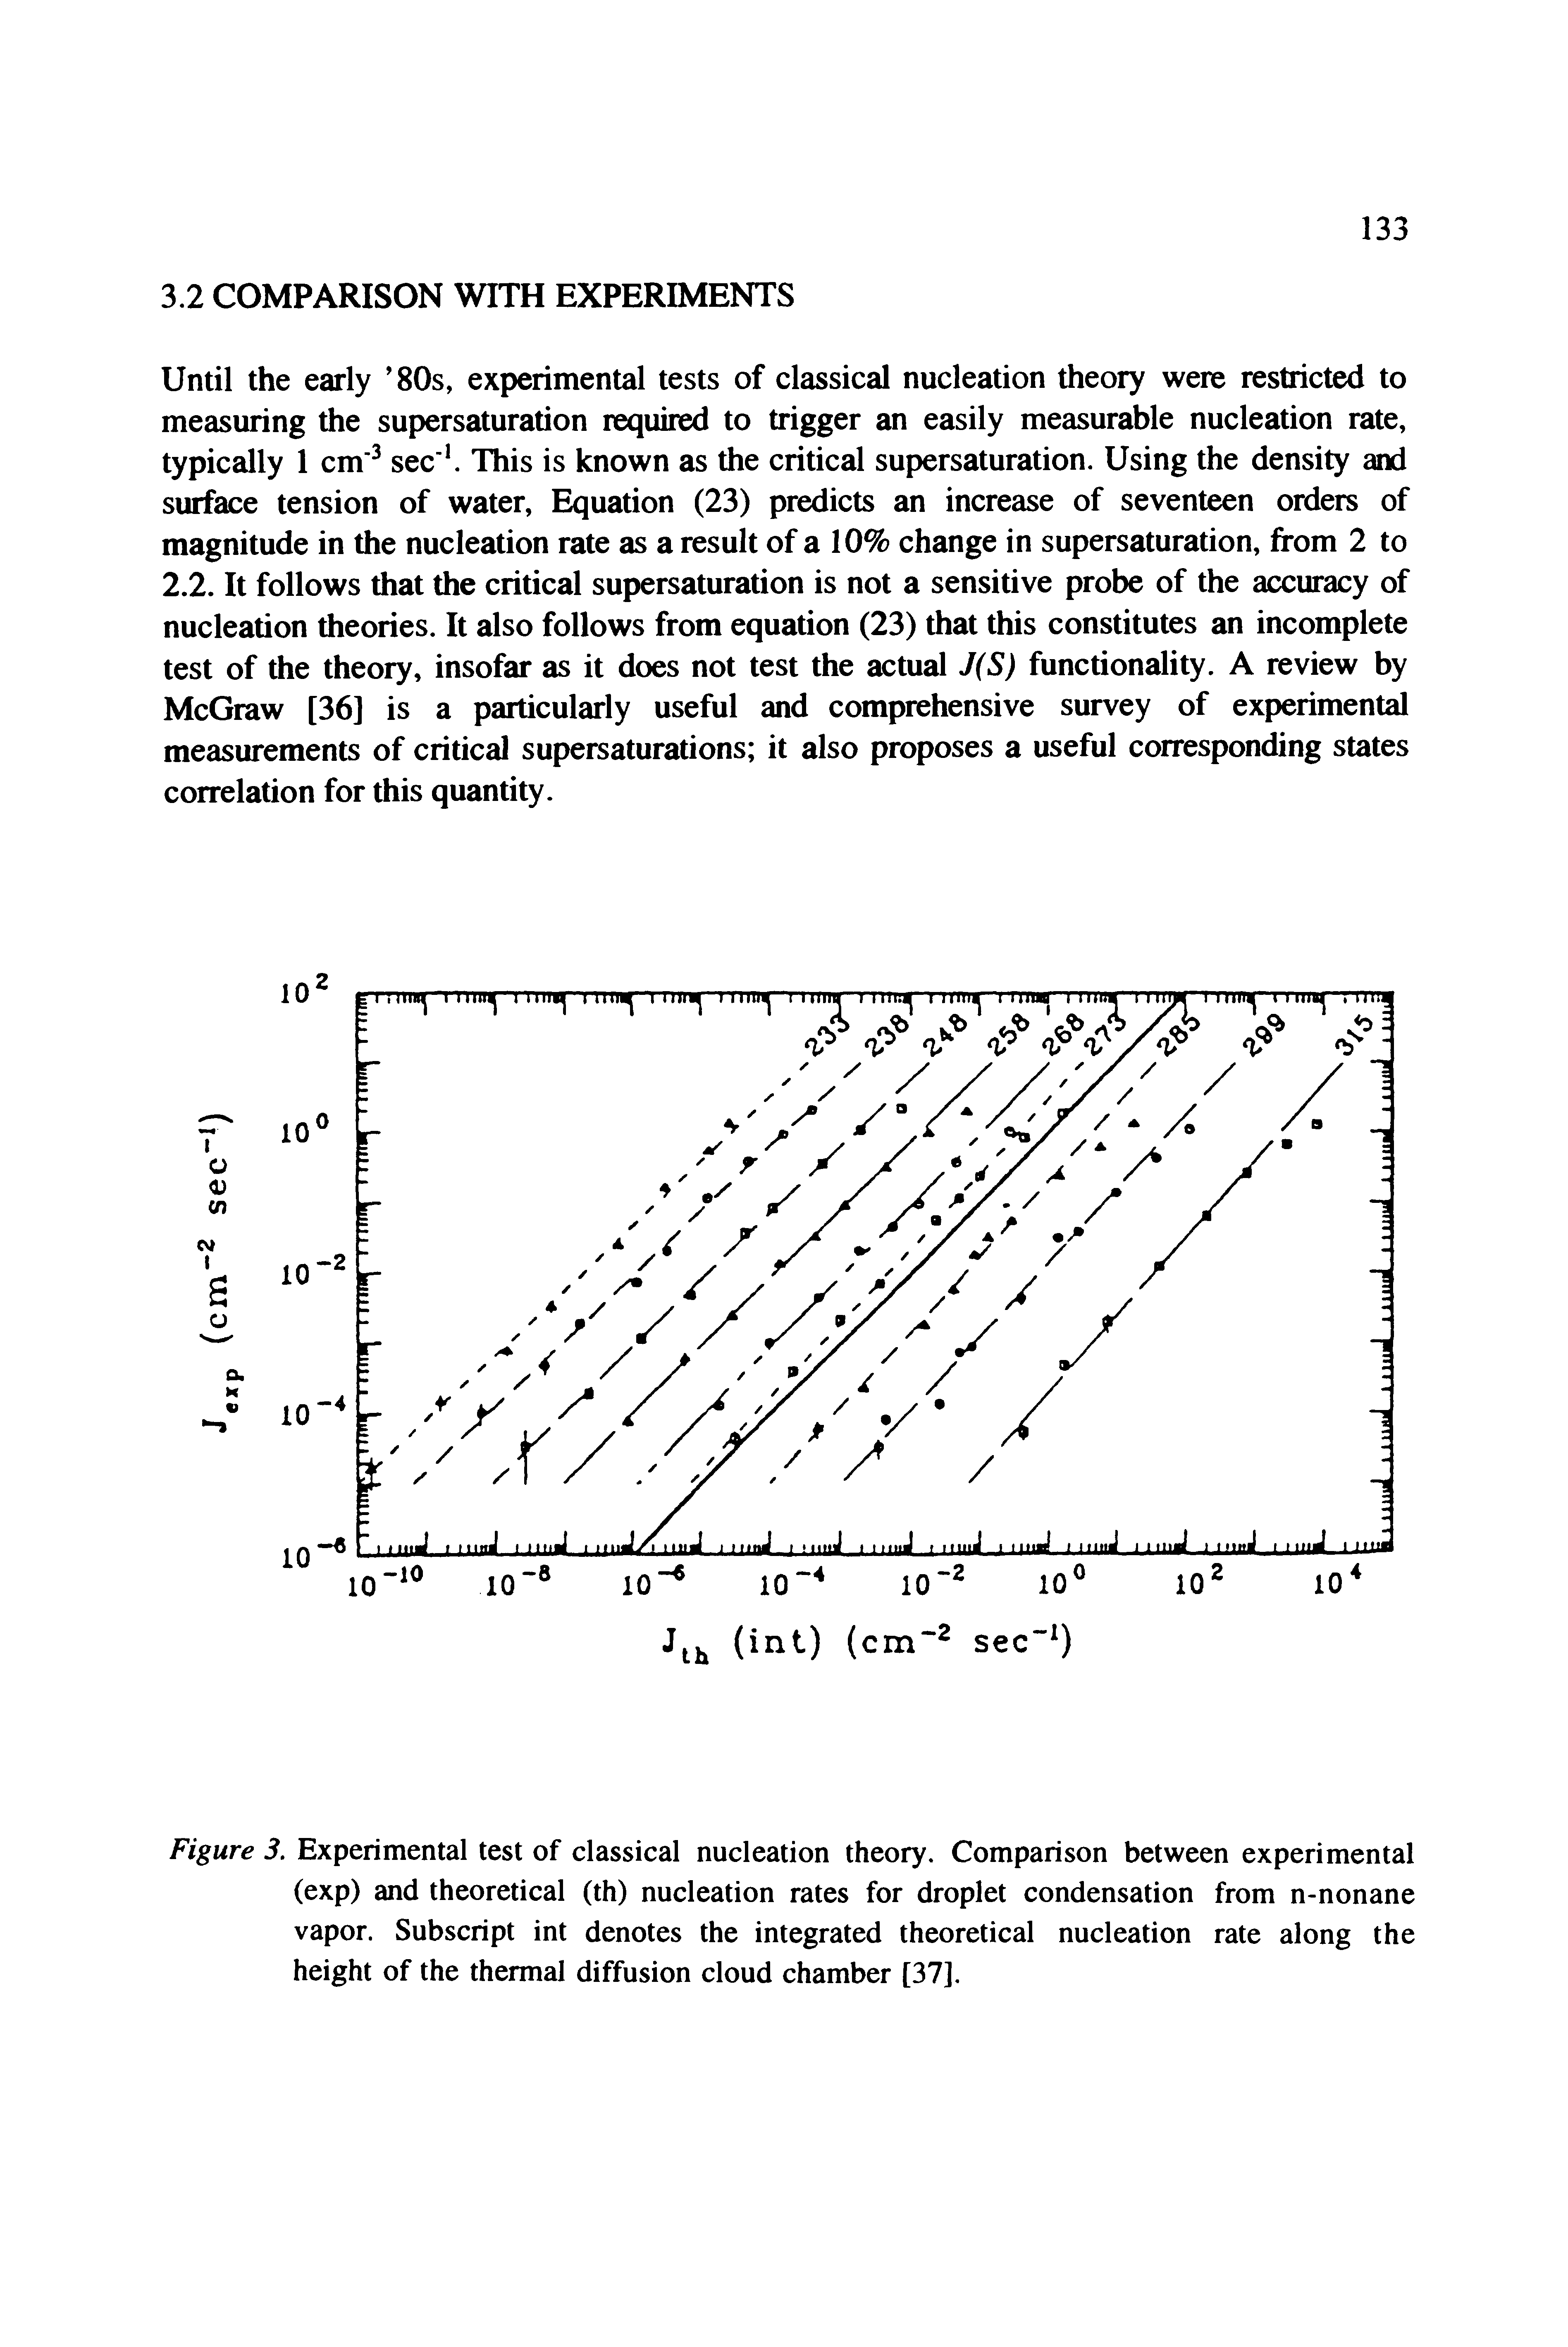 Figure 3. Experimental test of classical nucleation theory. Comparison between experimental (exp) and theoretical (th) nucleation rates for droplet condensation from n-nonane vapor. Subscript int denotes the integrated theoretical nucleation rate along the height of the thermal diffusion cloud chamber [37].